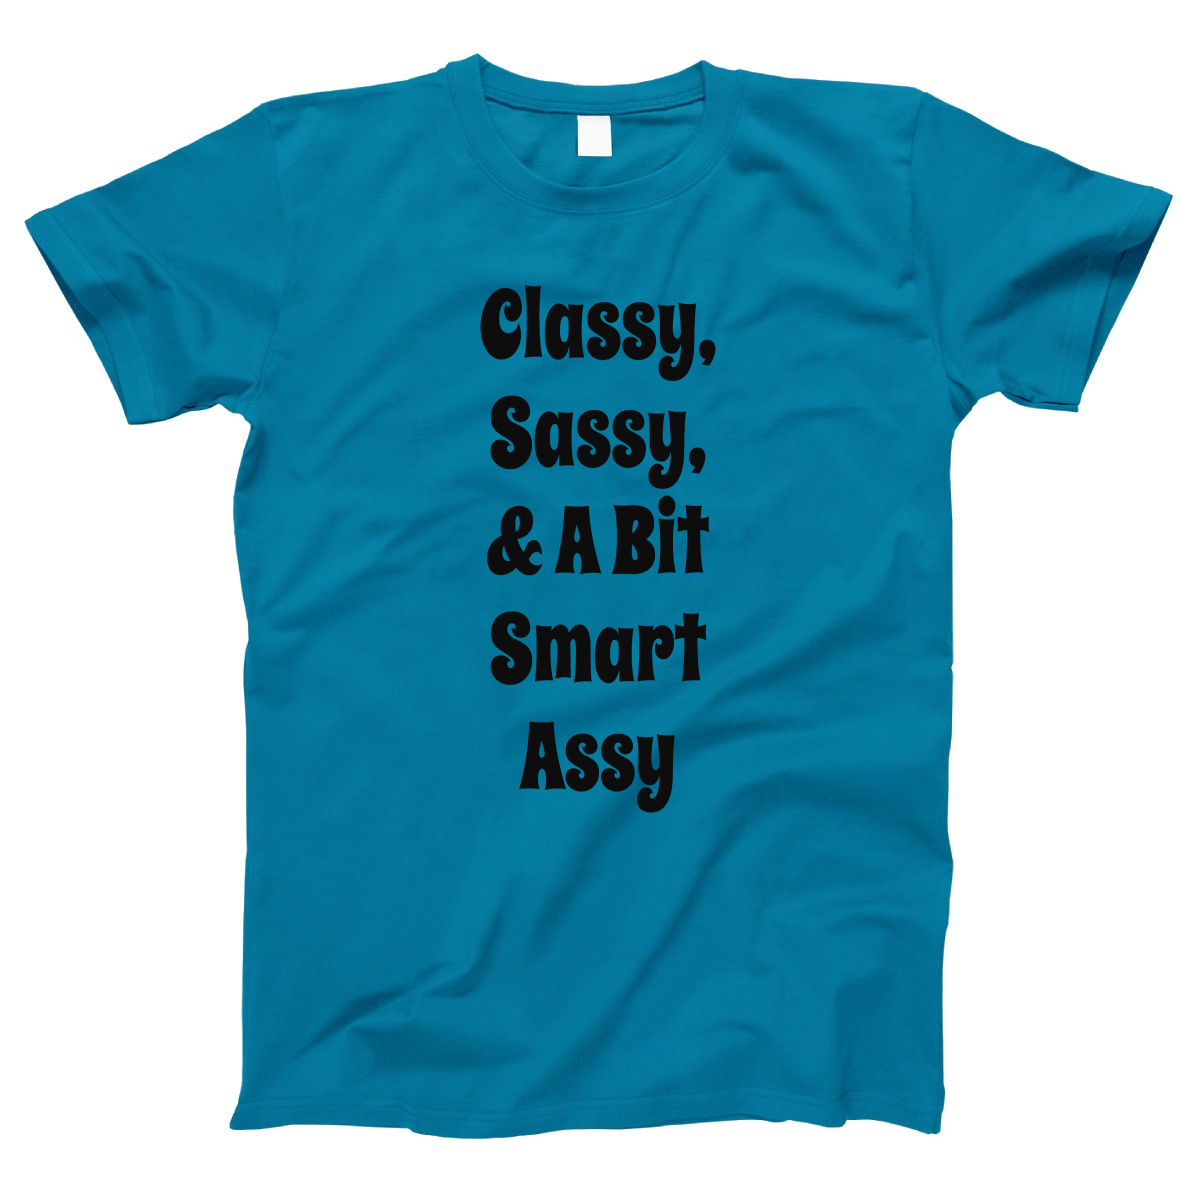 Classy Sassy and a Bit Smart Assy Women's T-shirt | Turquoise